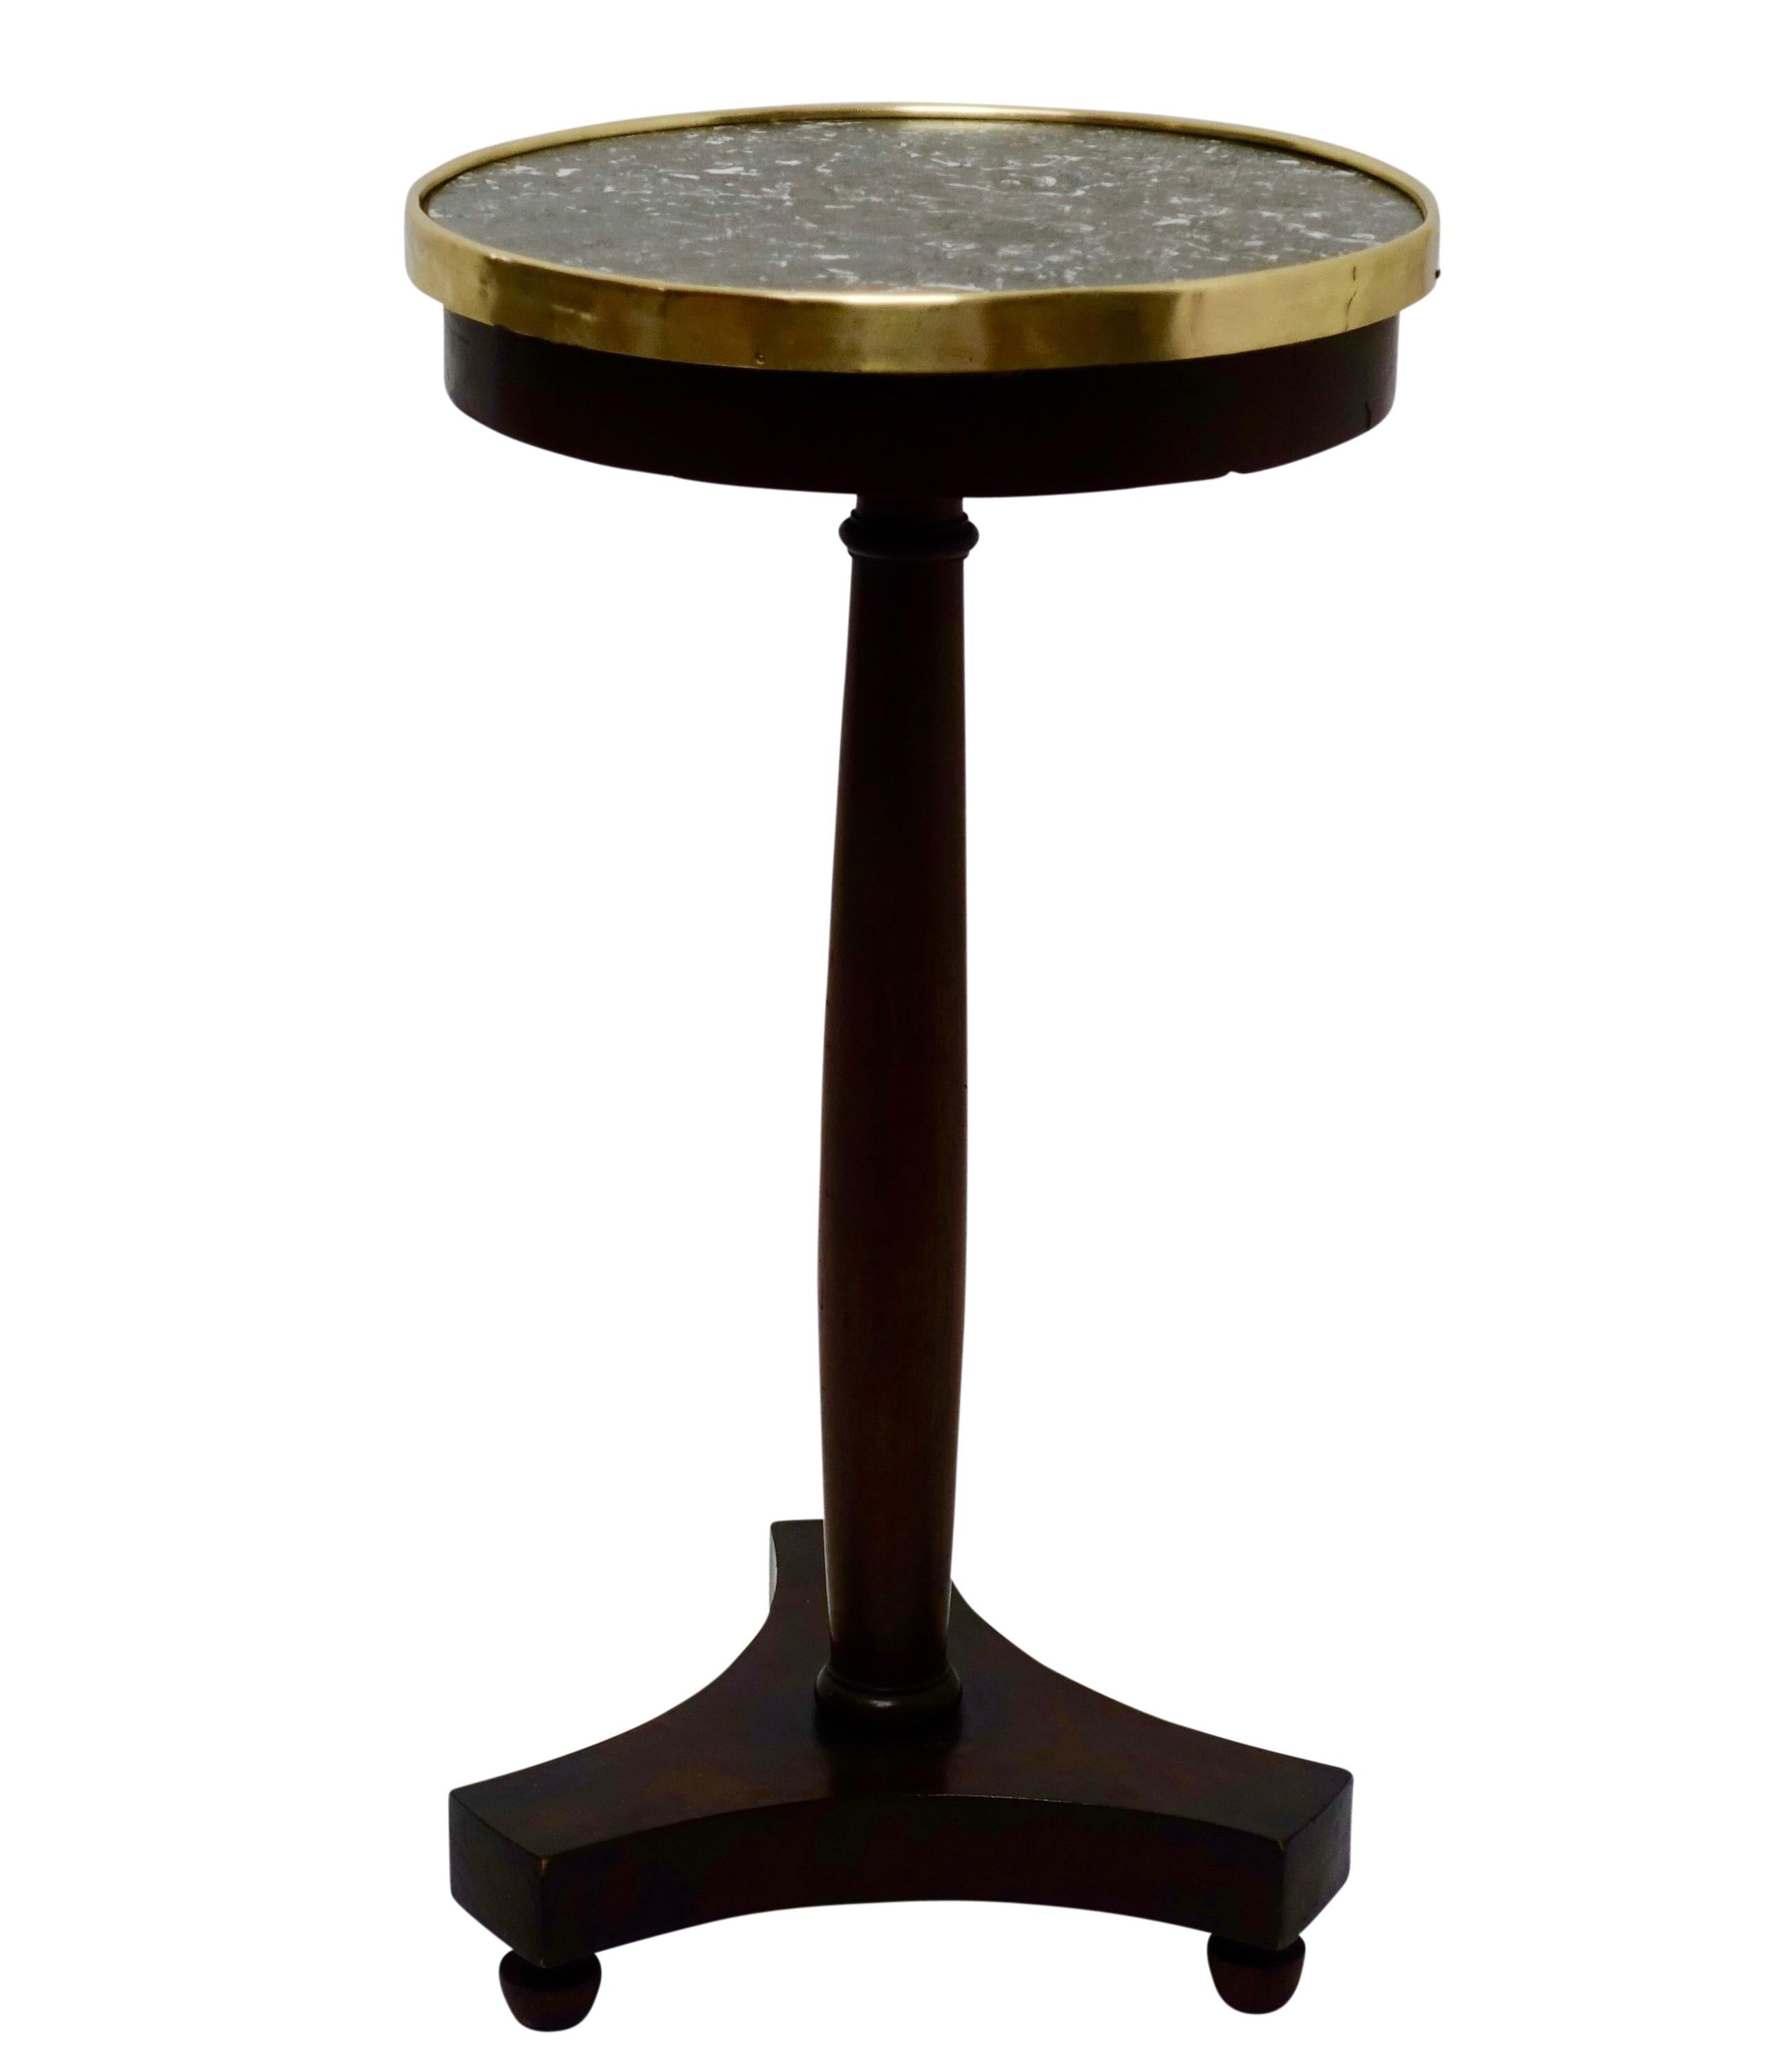 A unique Empire style mahogany side table or candle stand with an inset gray marble top and brass gallery, supported on a shaped column fixed to tripartite base sitting on acorn shape feet, France, circa 1840.